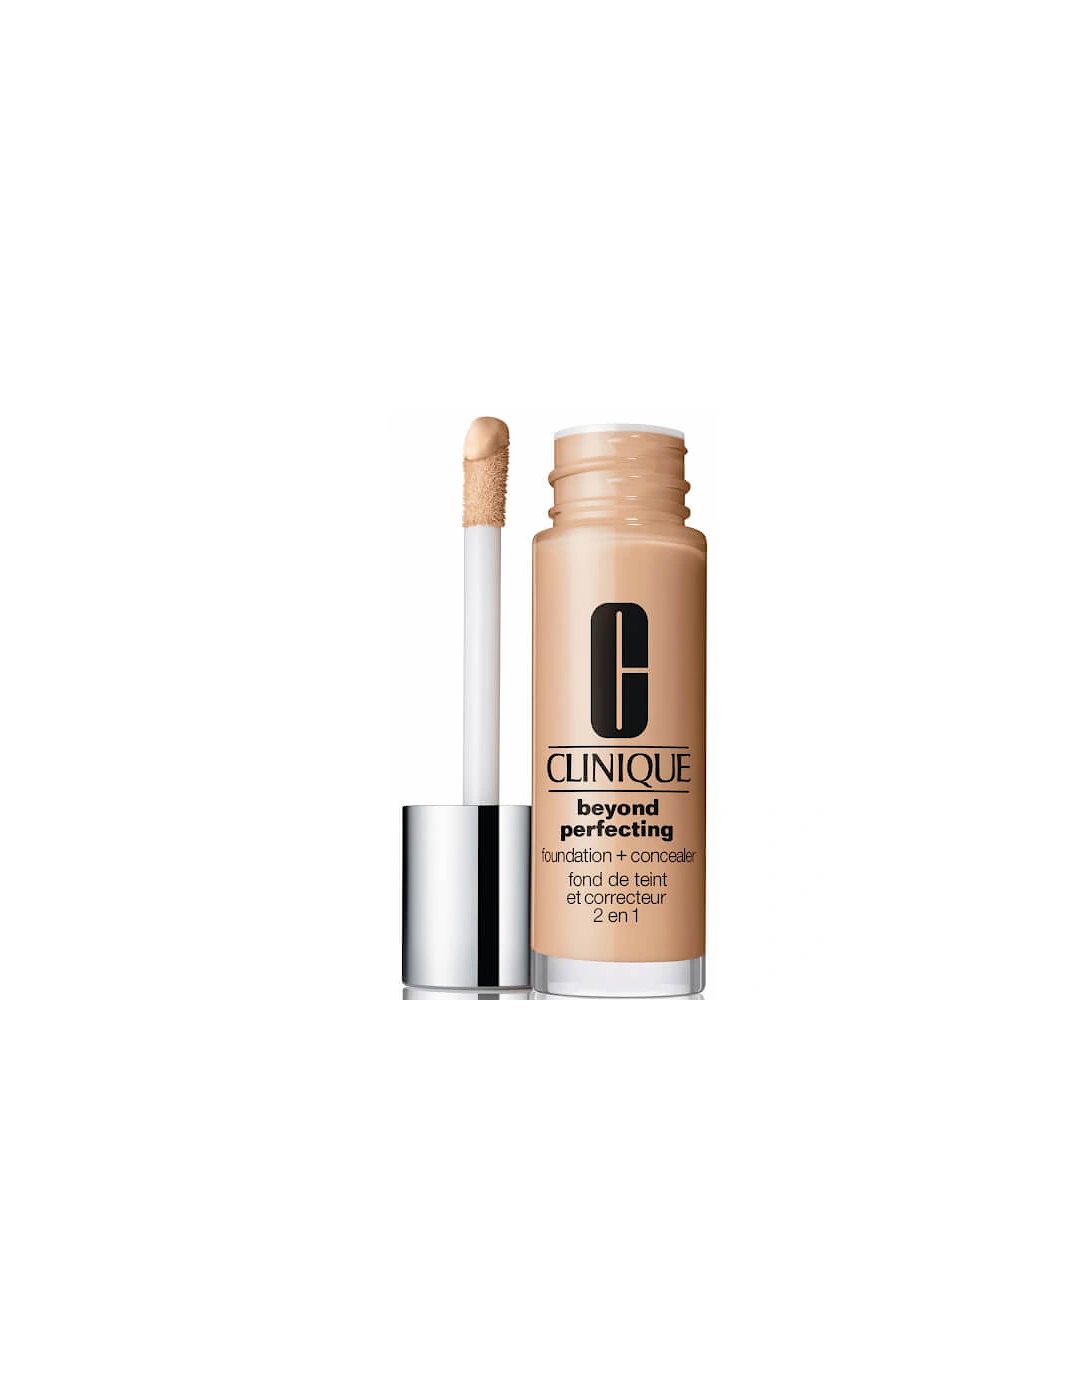 Beyond Perfecting Foundation and Concealer Ivory, 2 of 1